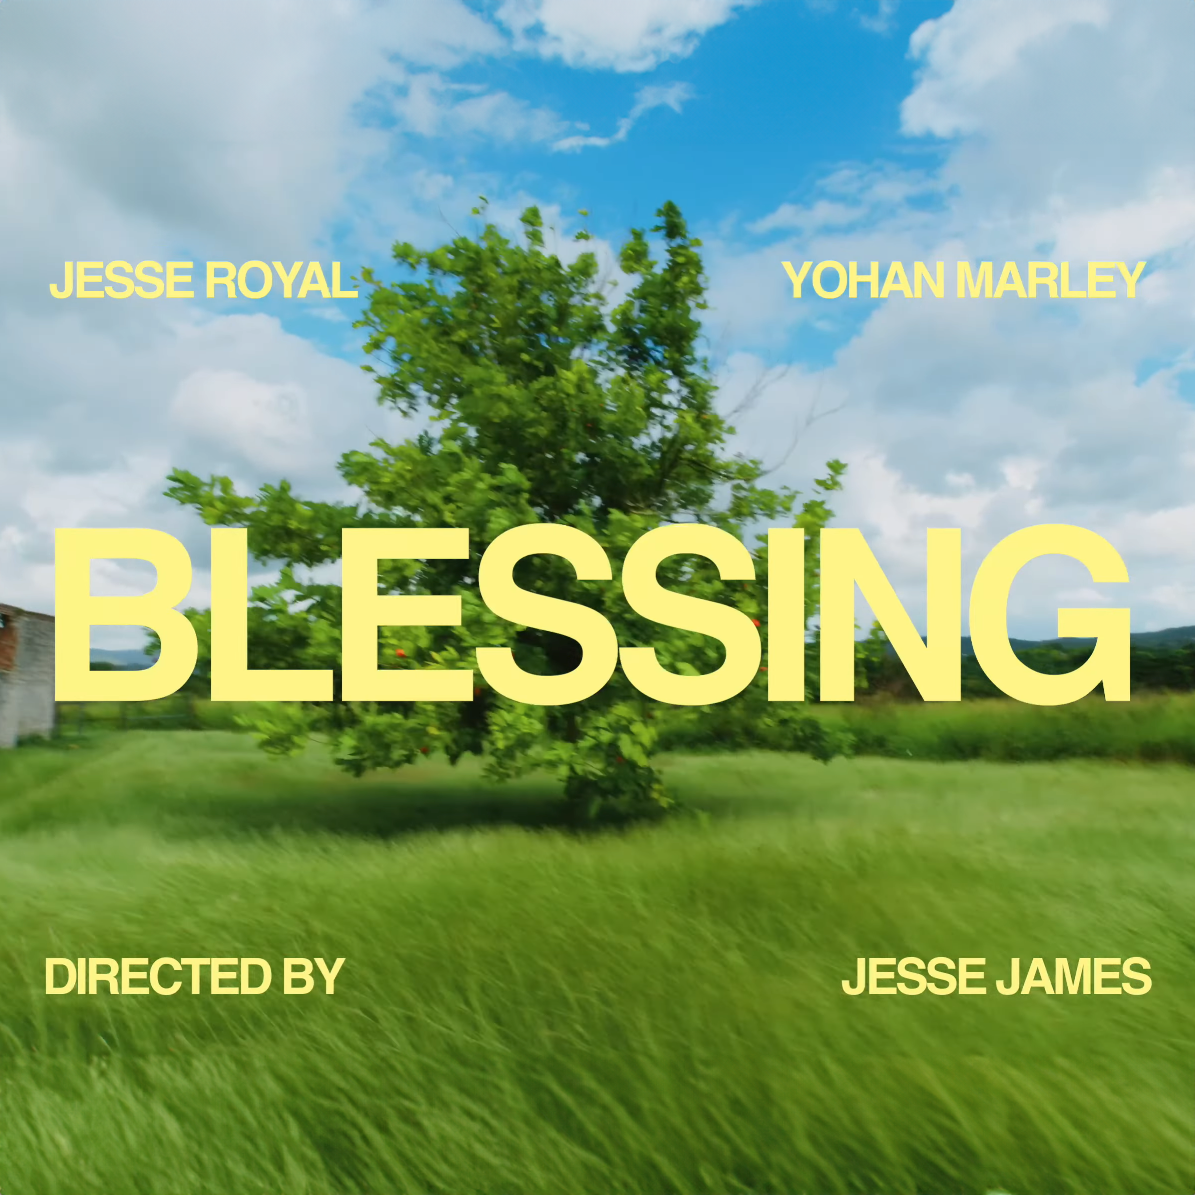 JESSE ROYAL / YOHAN MARLEY - "BLESSING" (OFFICIAL VIDEO)